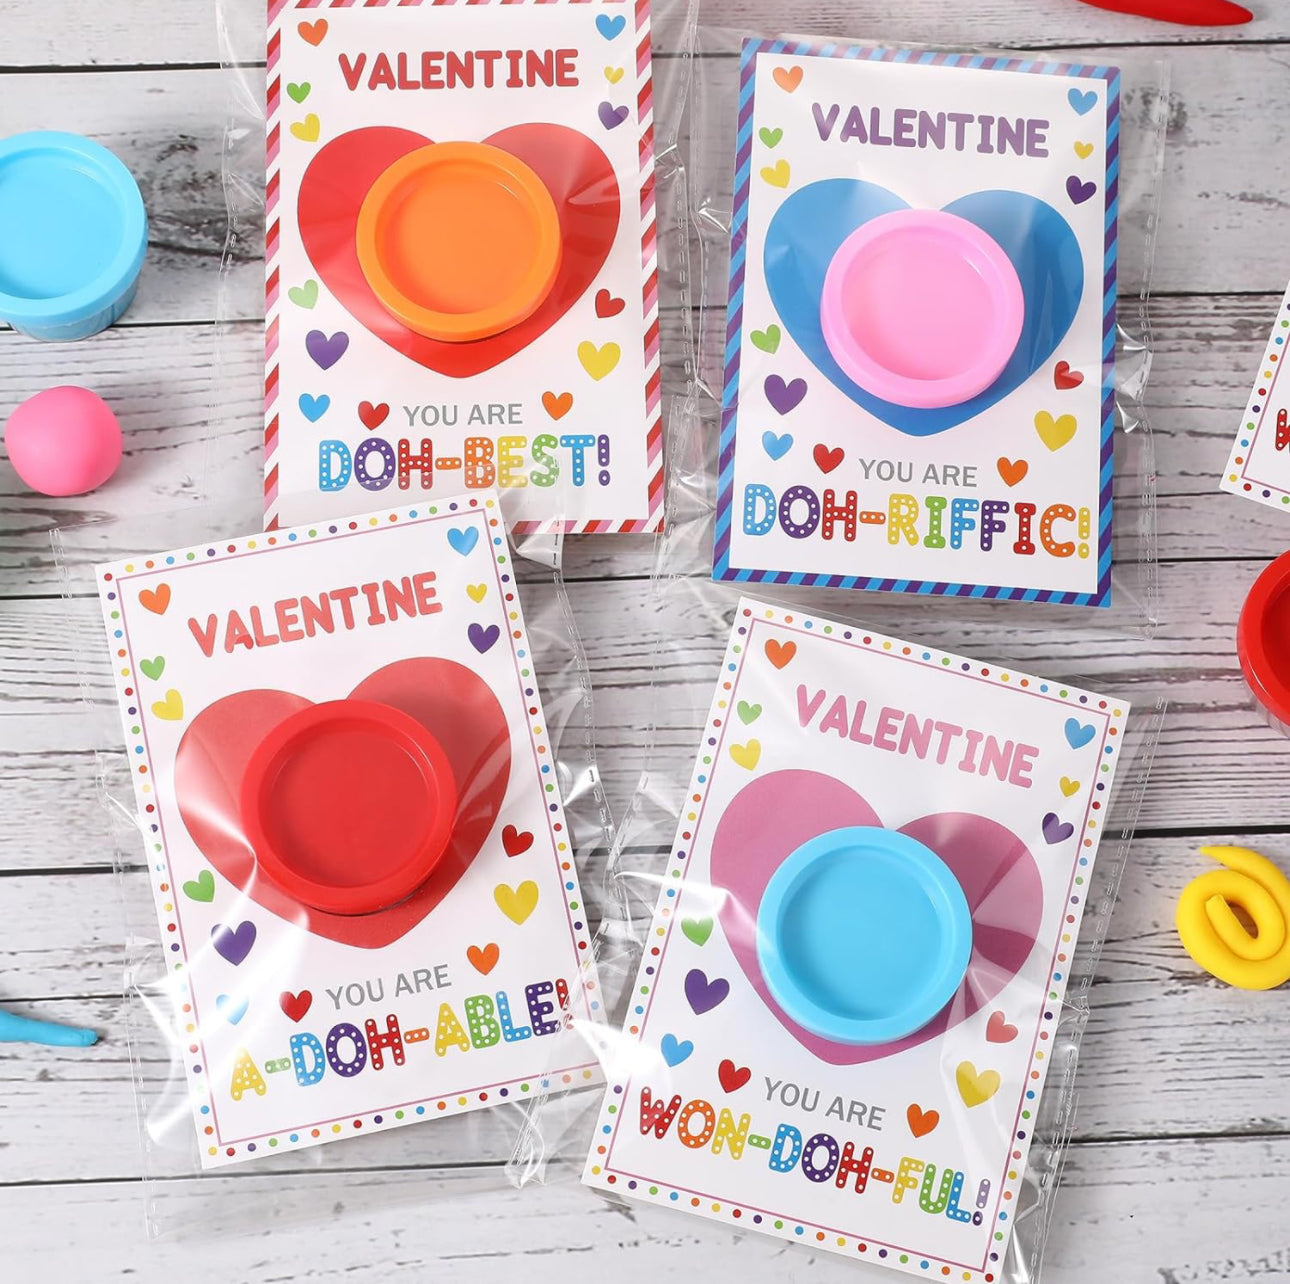 Mini Play Doh with Valentine Card